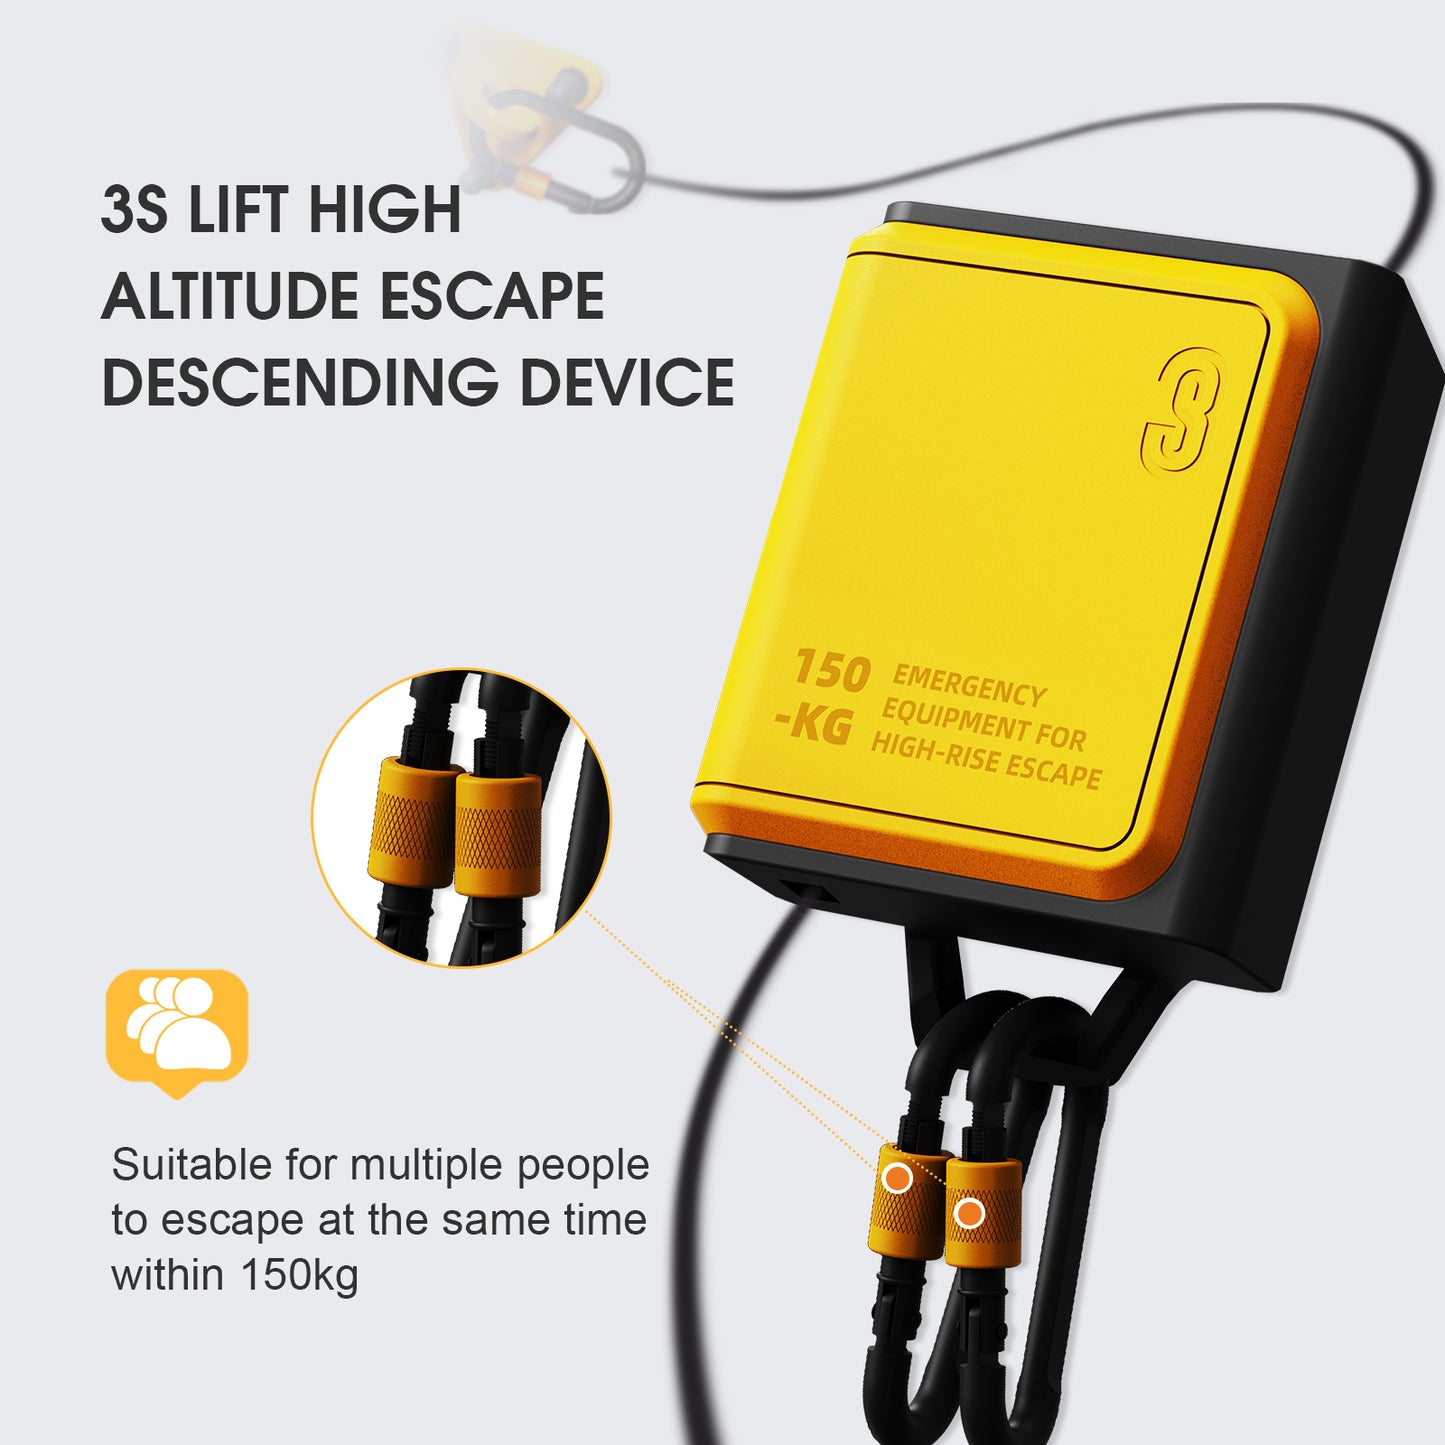 3S LIFT high-rise descent device, high-altitude evacuation equipment for the whole family, 65 ft emergency safety exit on the 2nd-7th floor, no need to wait when a disaster occurs, evacuate at any time